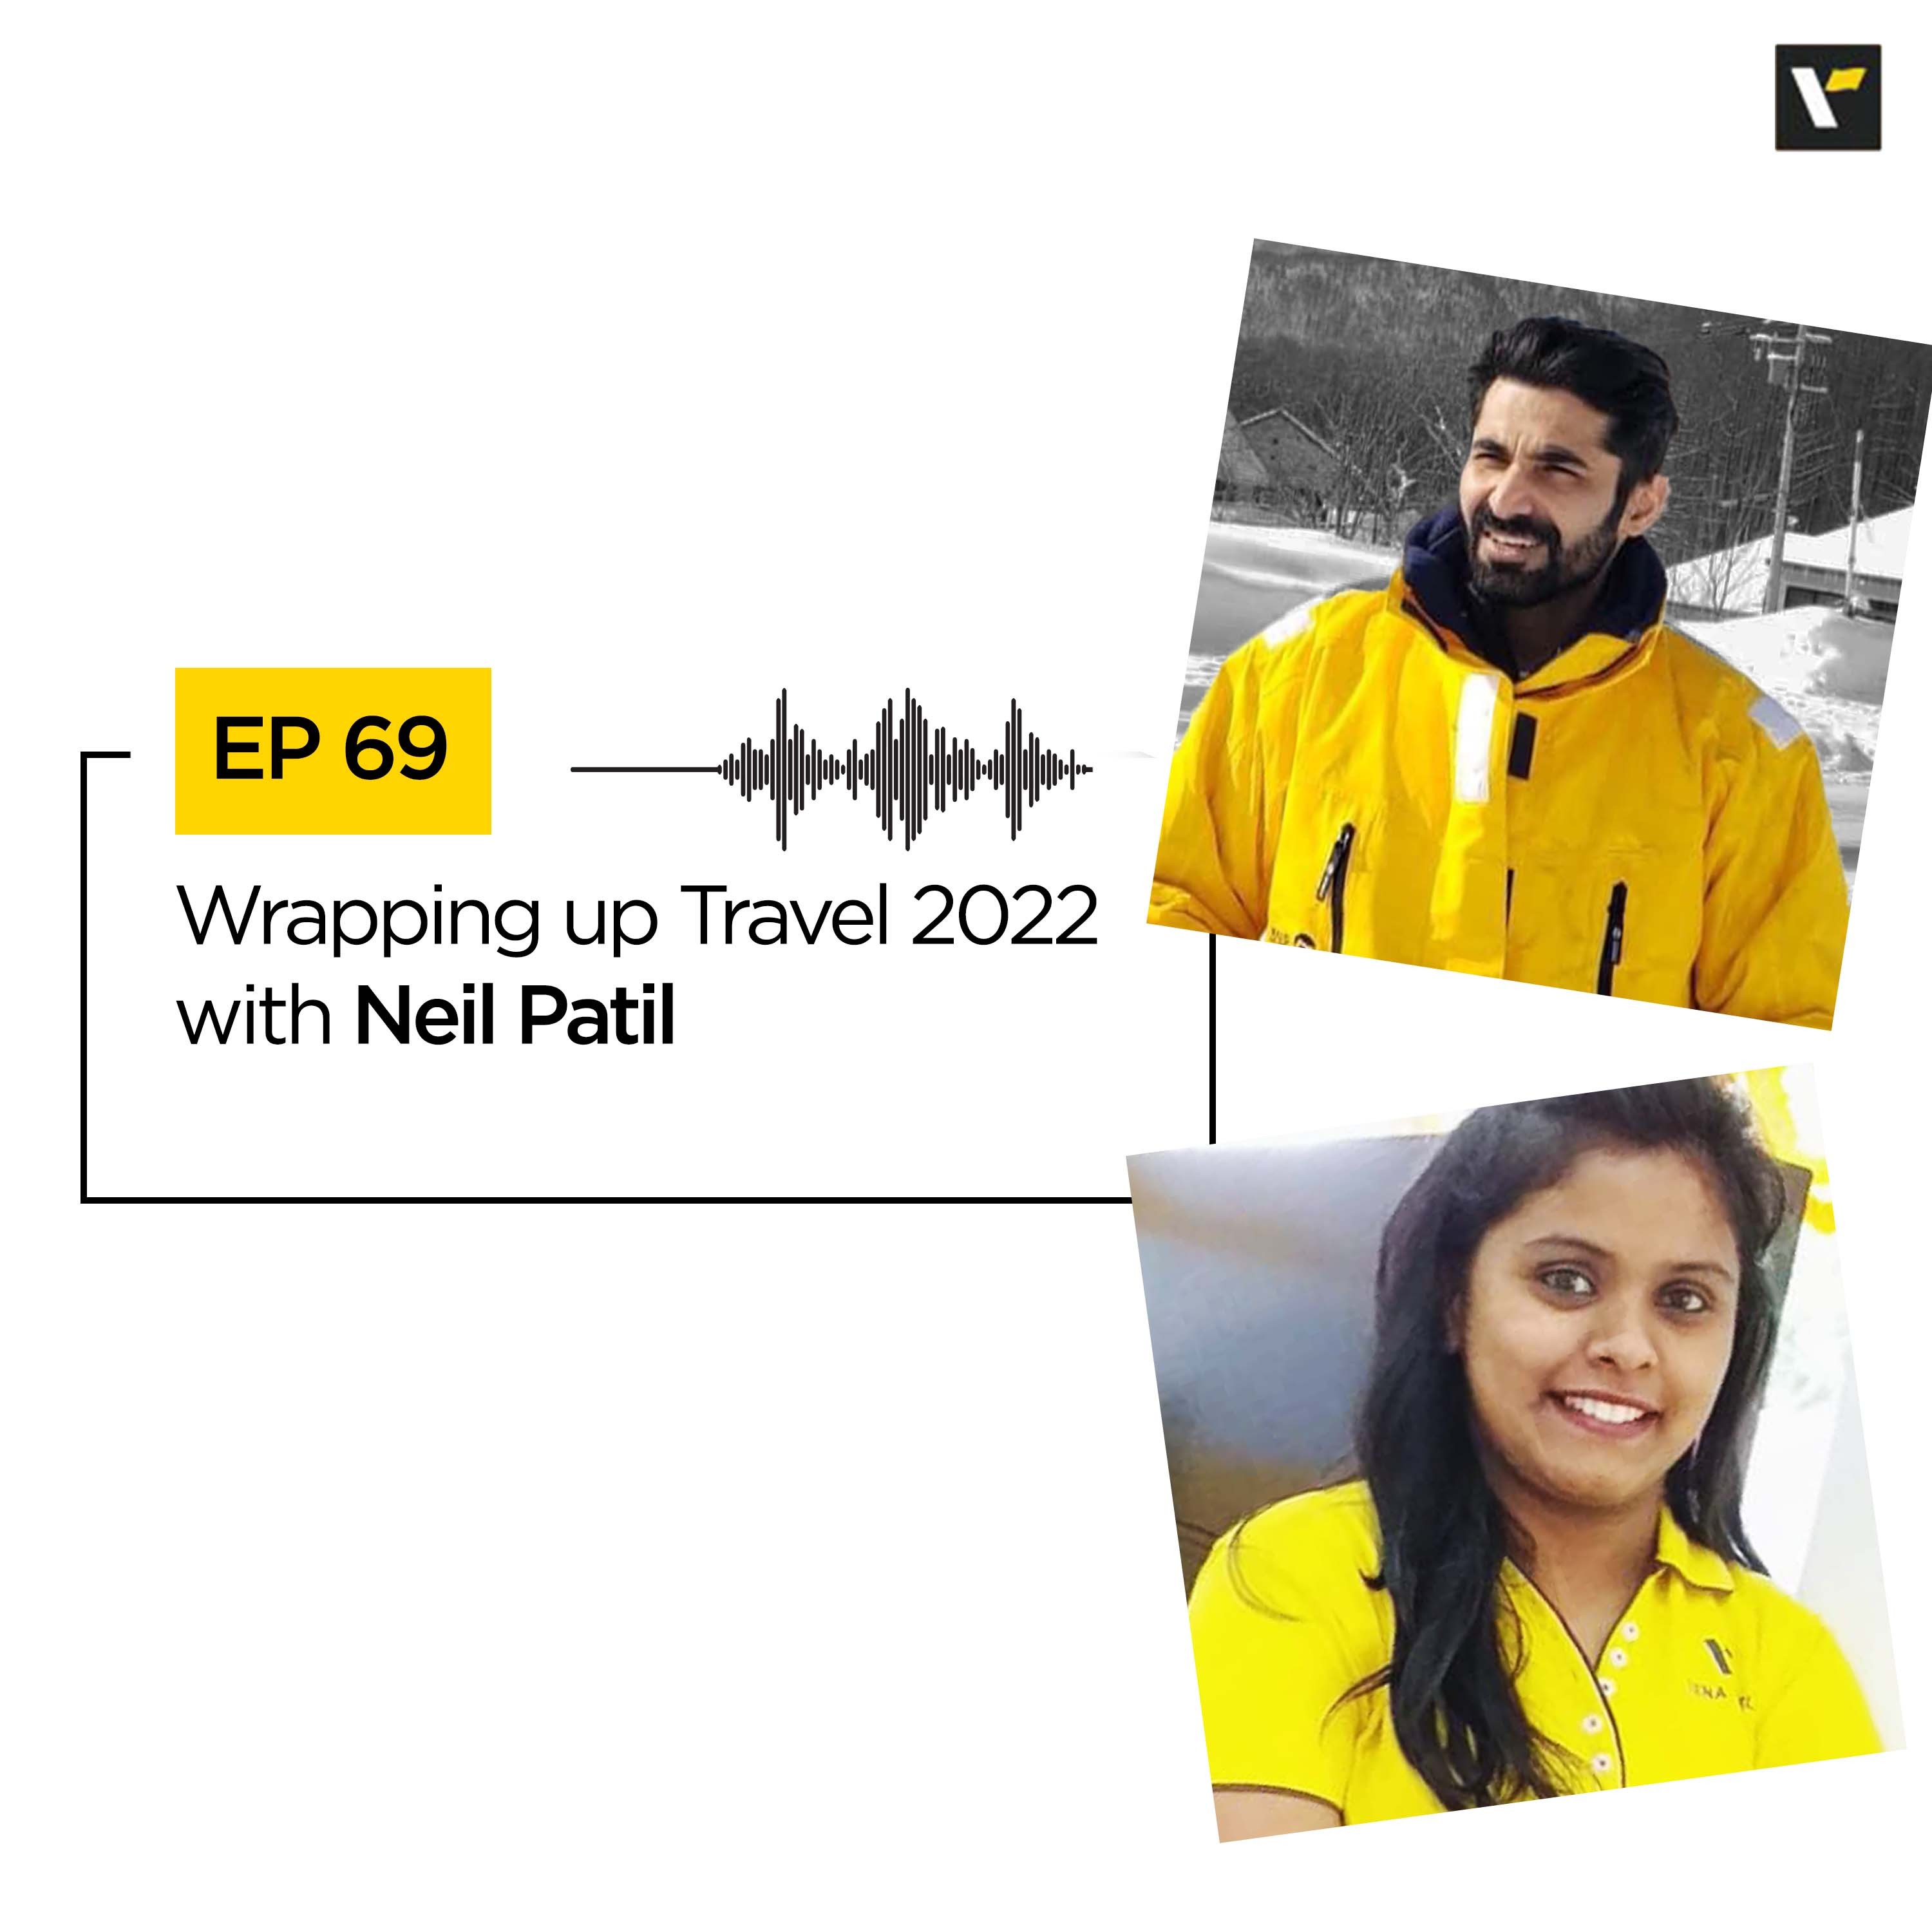 Ep 69 Wrapping up Travel 2022 with Neil Patil